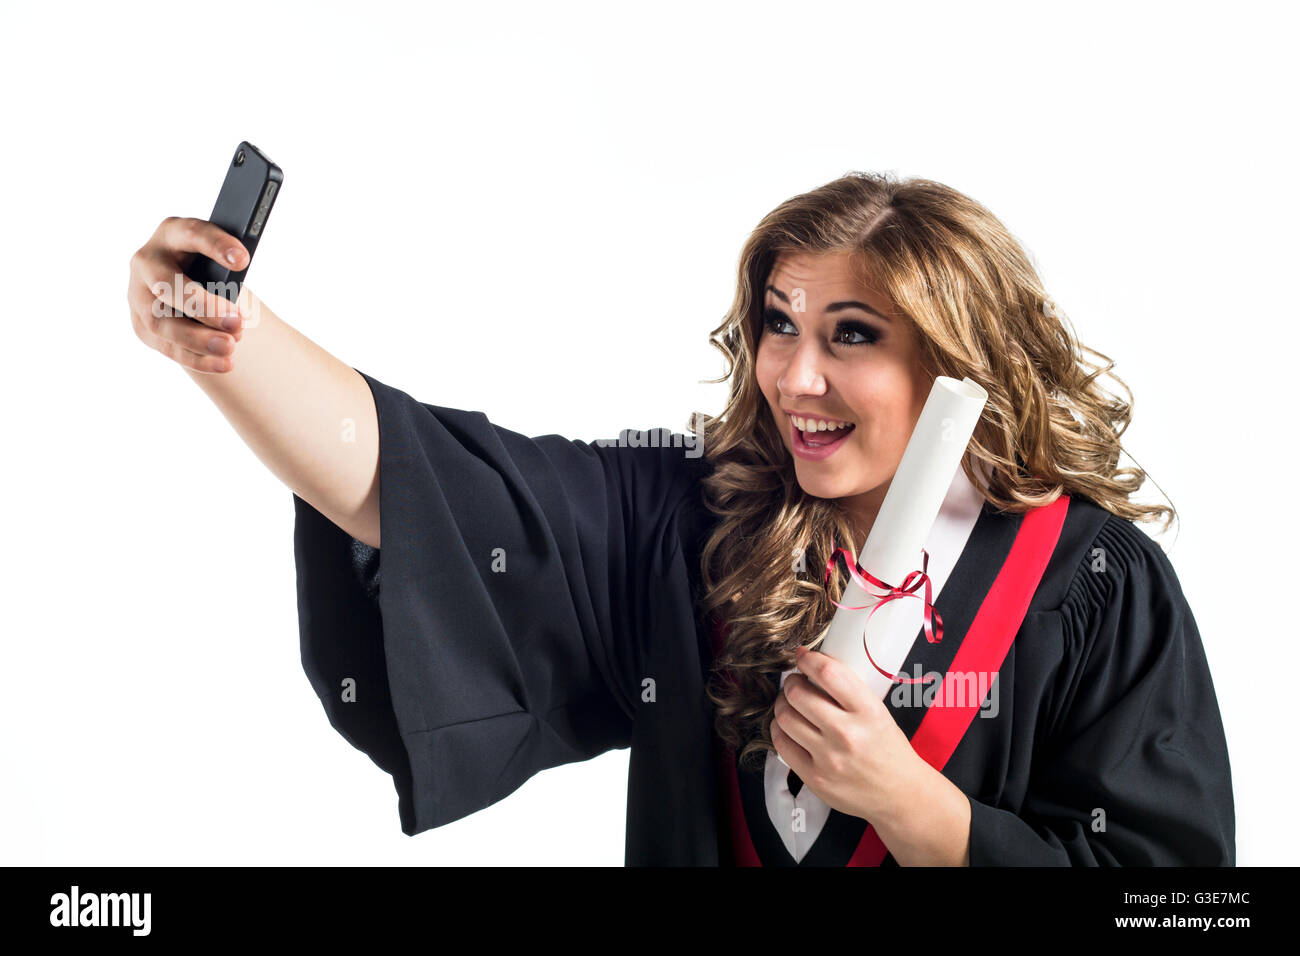 Young graduating woman taking a self-portrait with her smart phone and celebrating her graduation; Edmonton, Alberta, Canada Stock Photo